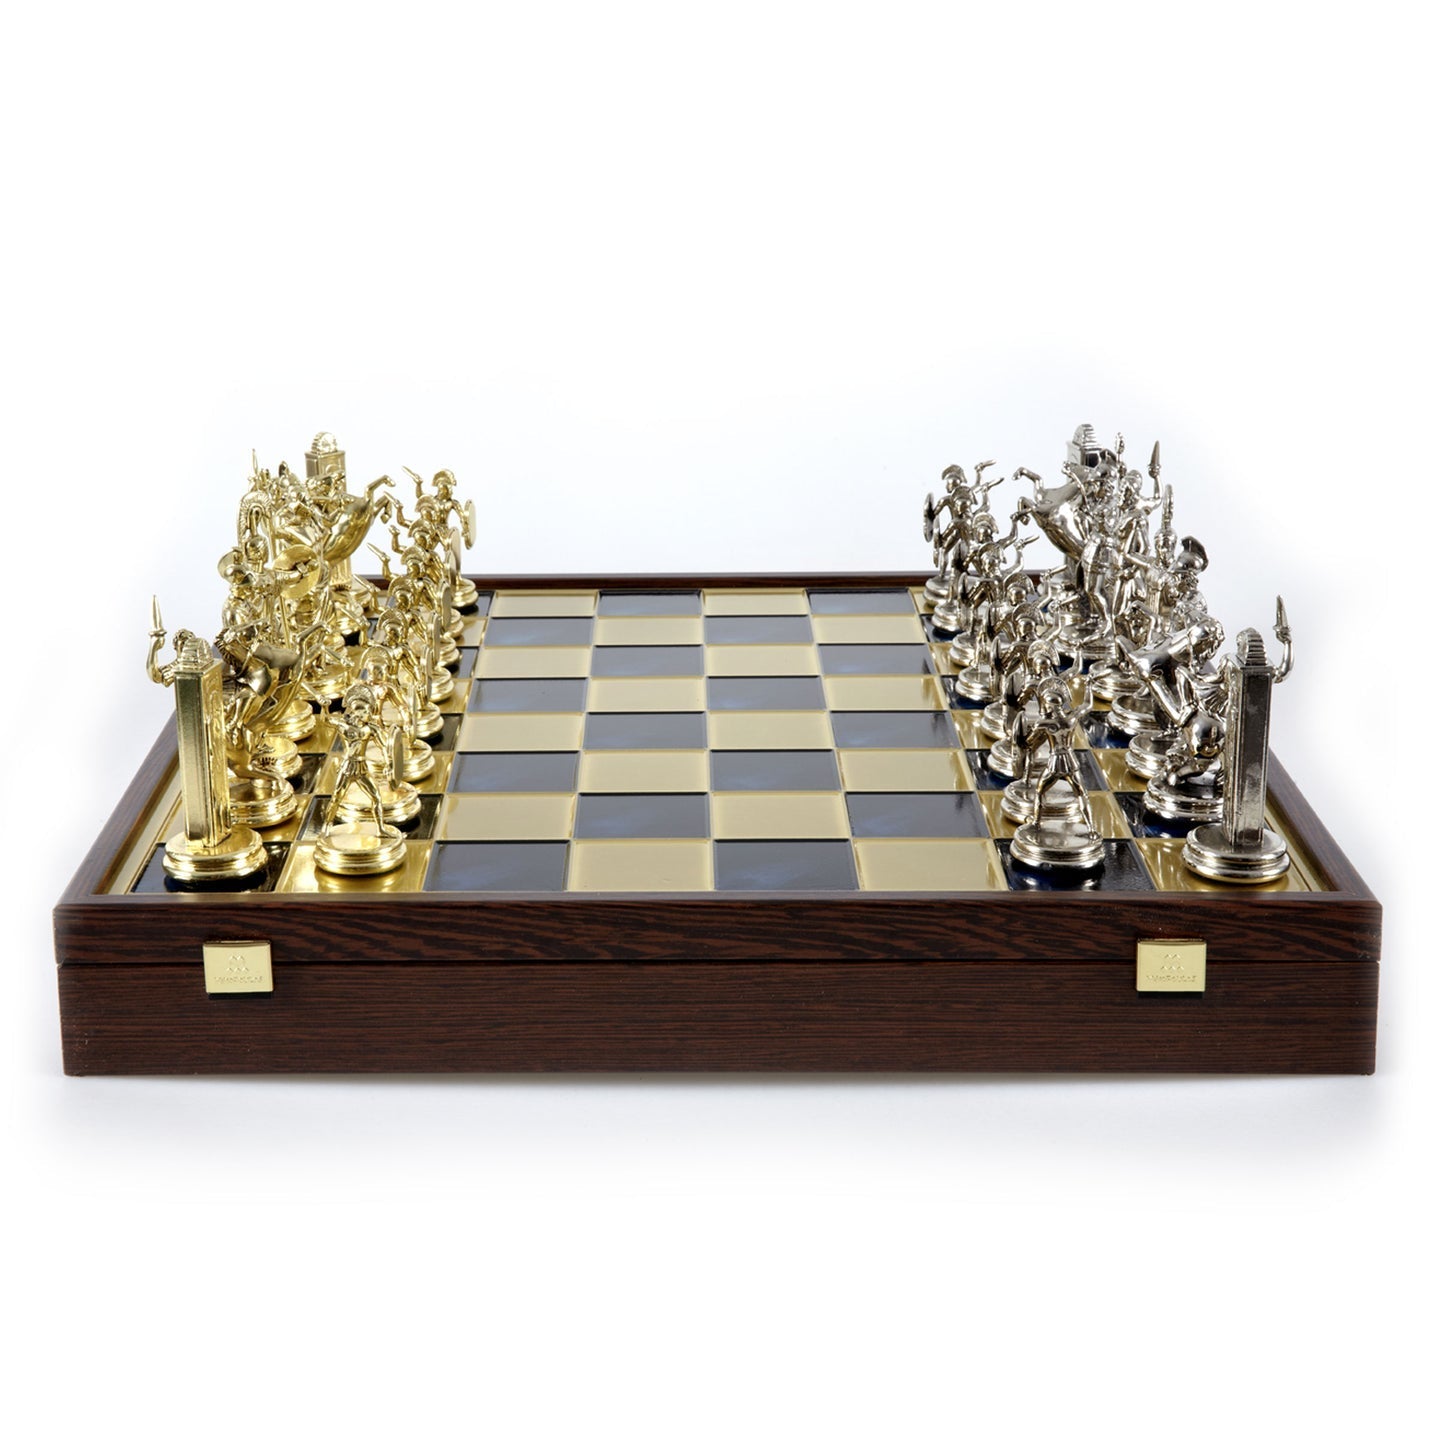 GREEK MYTHOLOGY CHESS SET in wooden box with gold/silver chessmen and bronze chessboard (Extra Large) - LAZADO